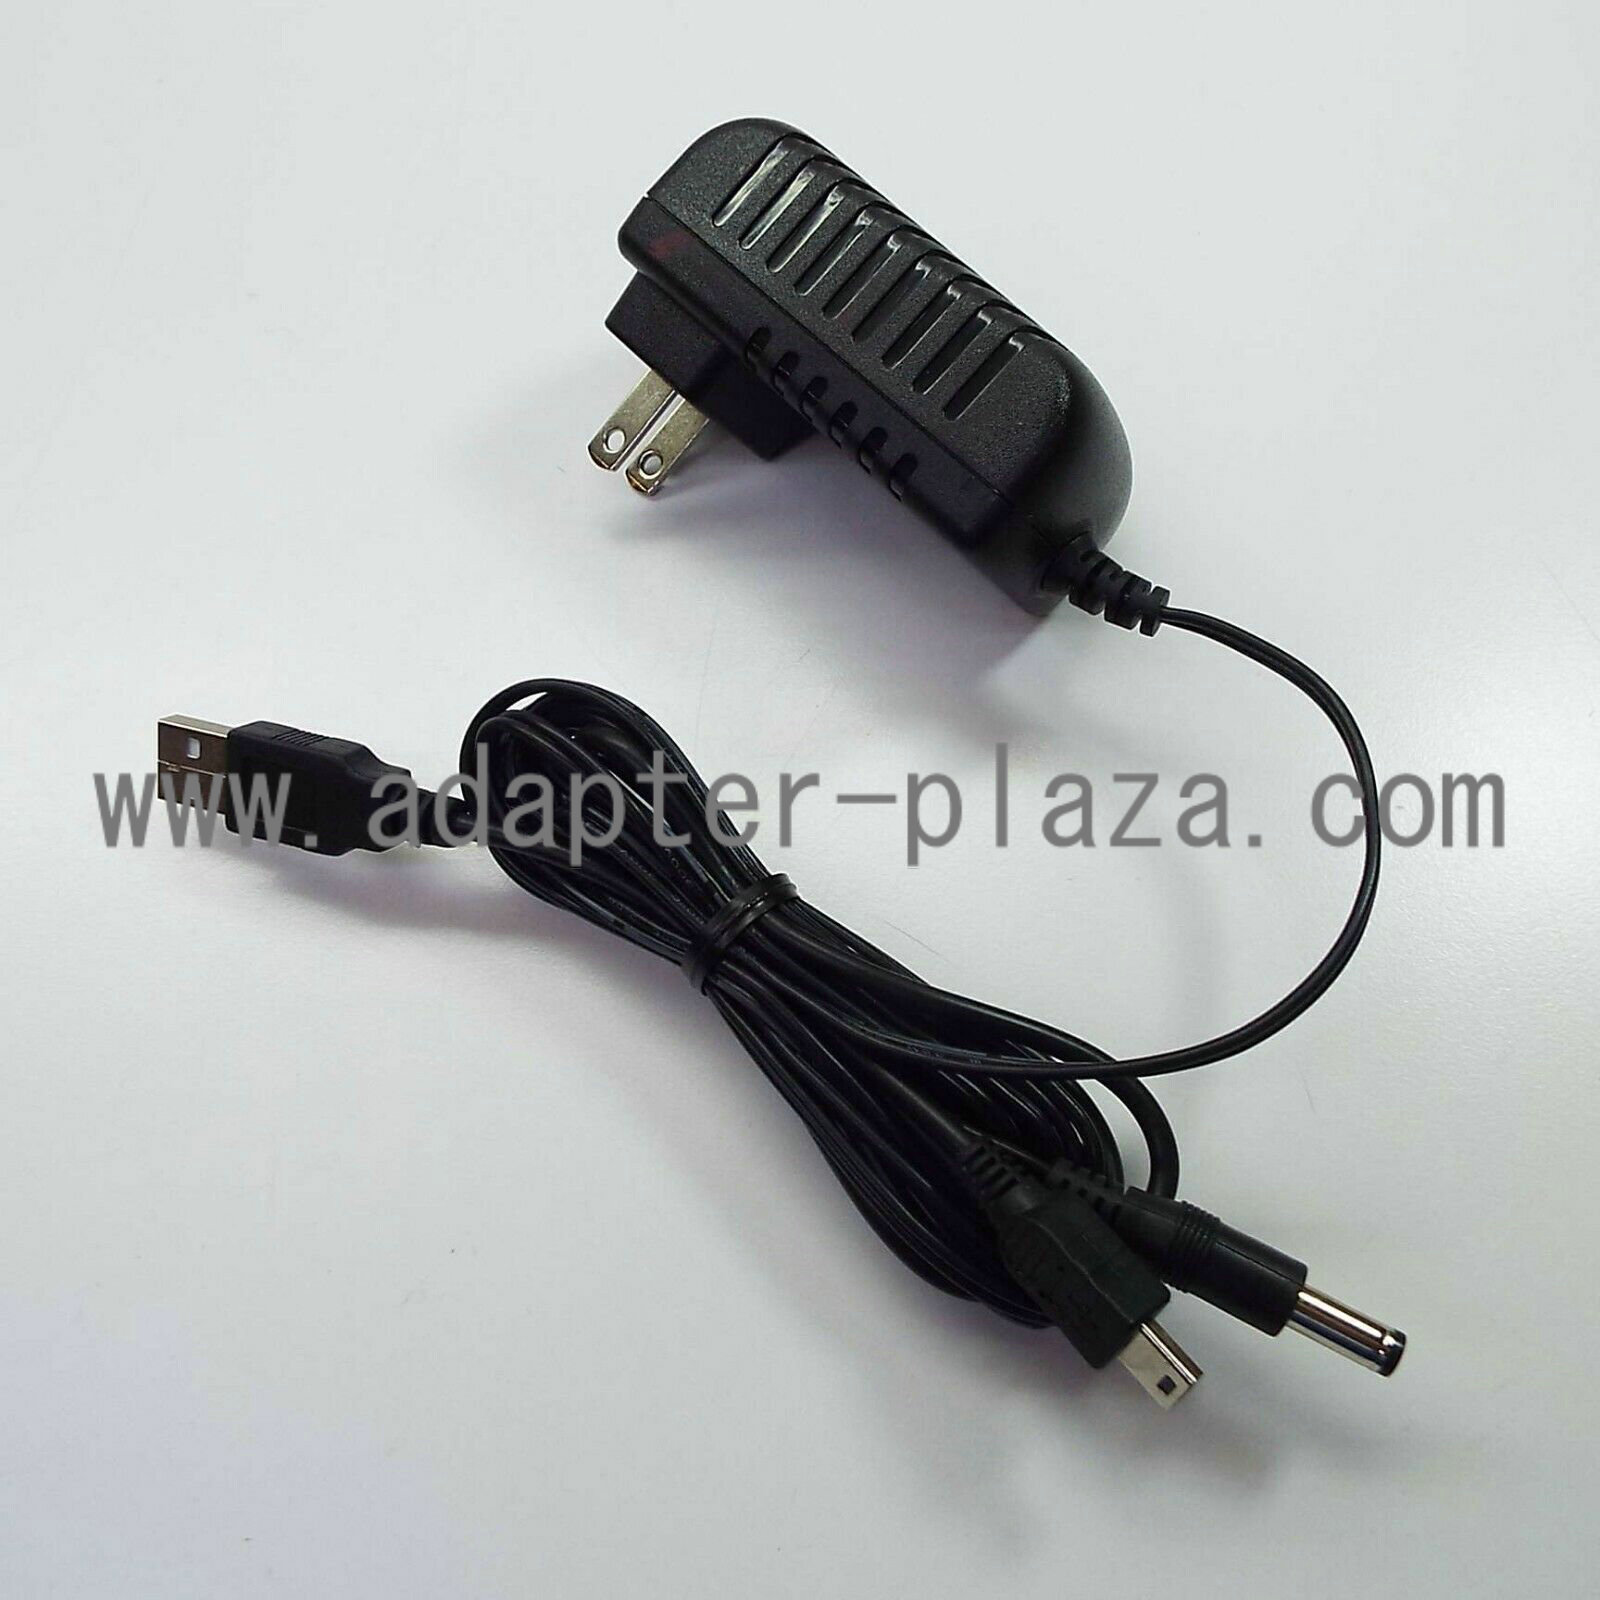 *Brand NEW*12.0V 1.50A AC DC Adapter I2900 G-PROJECT JDA1200150WUS POWER SUPPLY